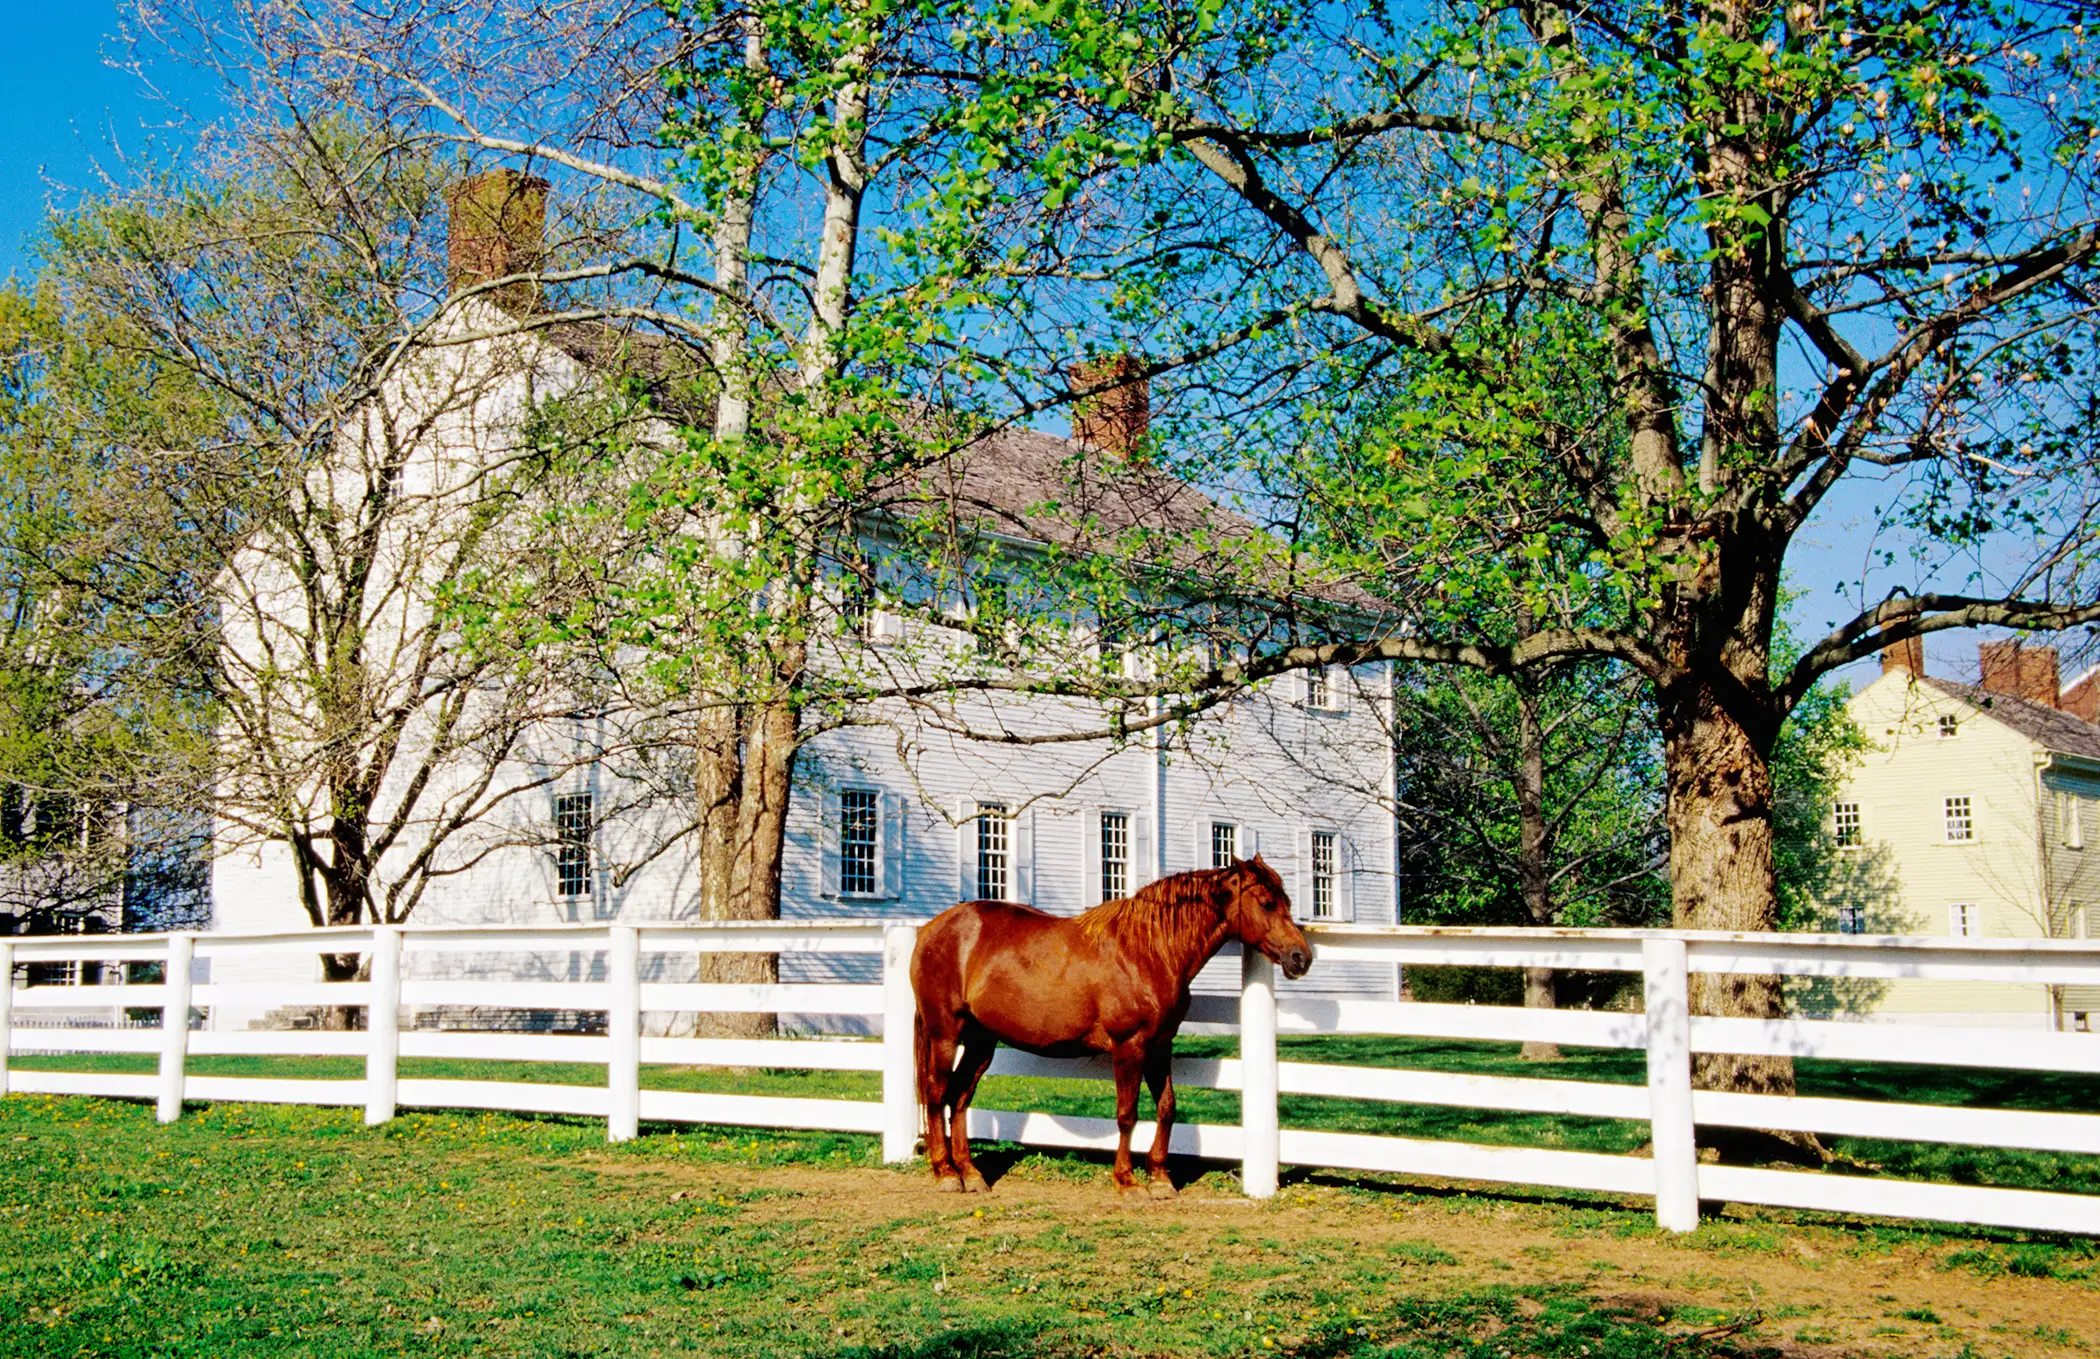 Lexington, Kentucky. The Horse Capital of the World is in the center of the inner Bluegrass Region. And have we mentioned you will never have to worry about finding good bourbon again?